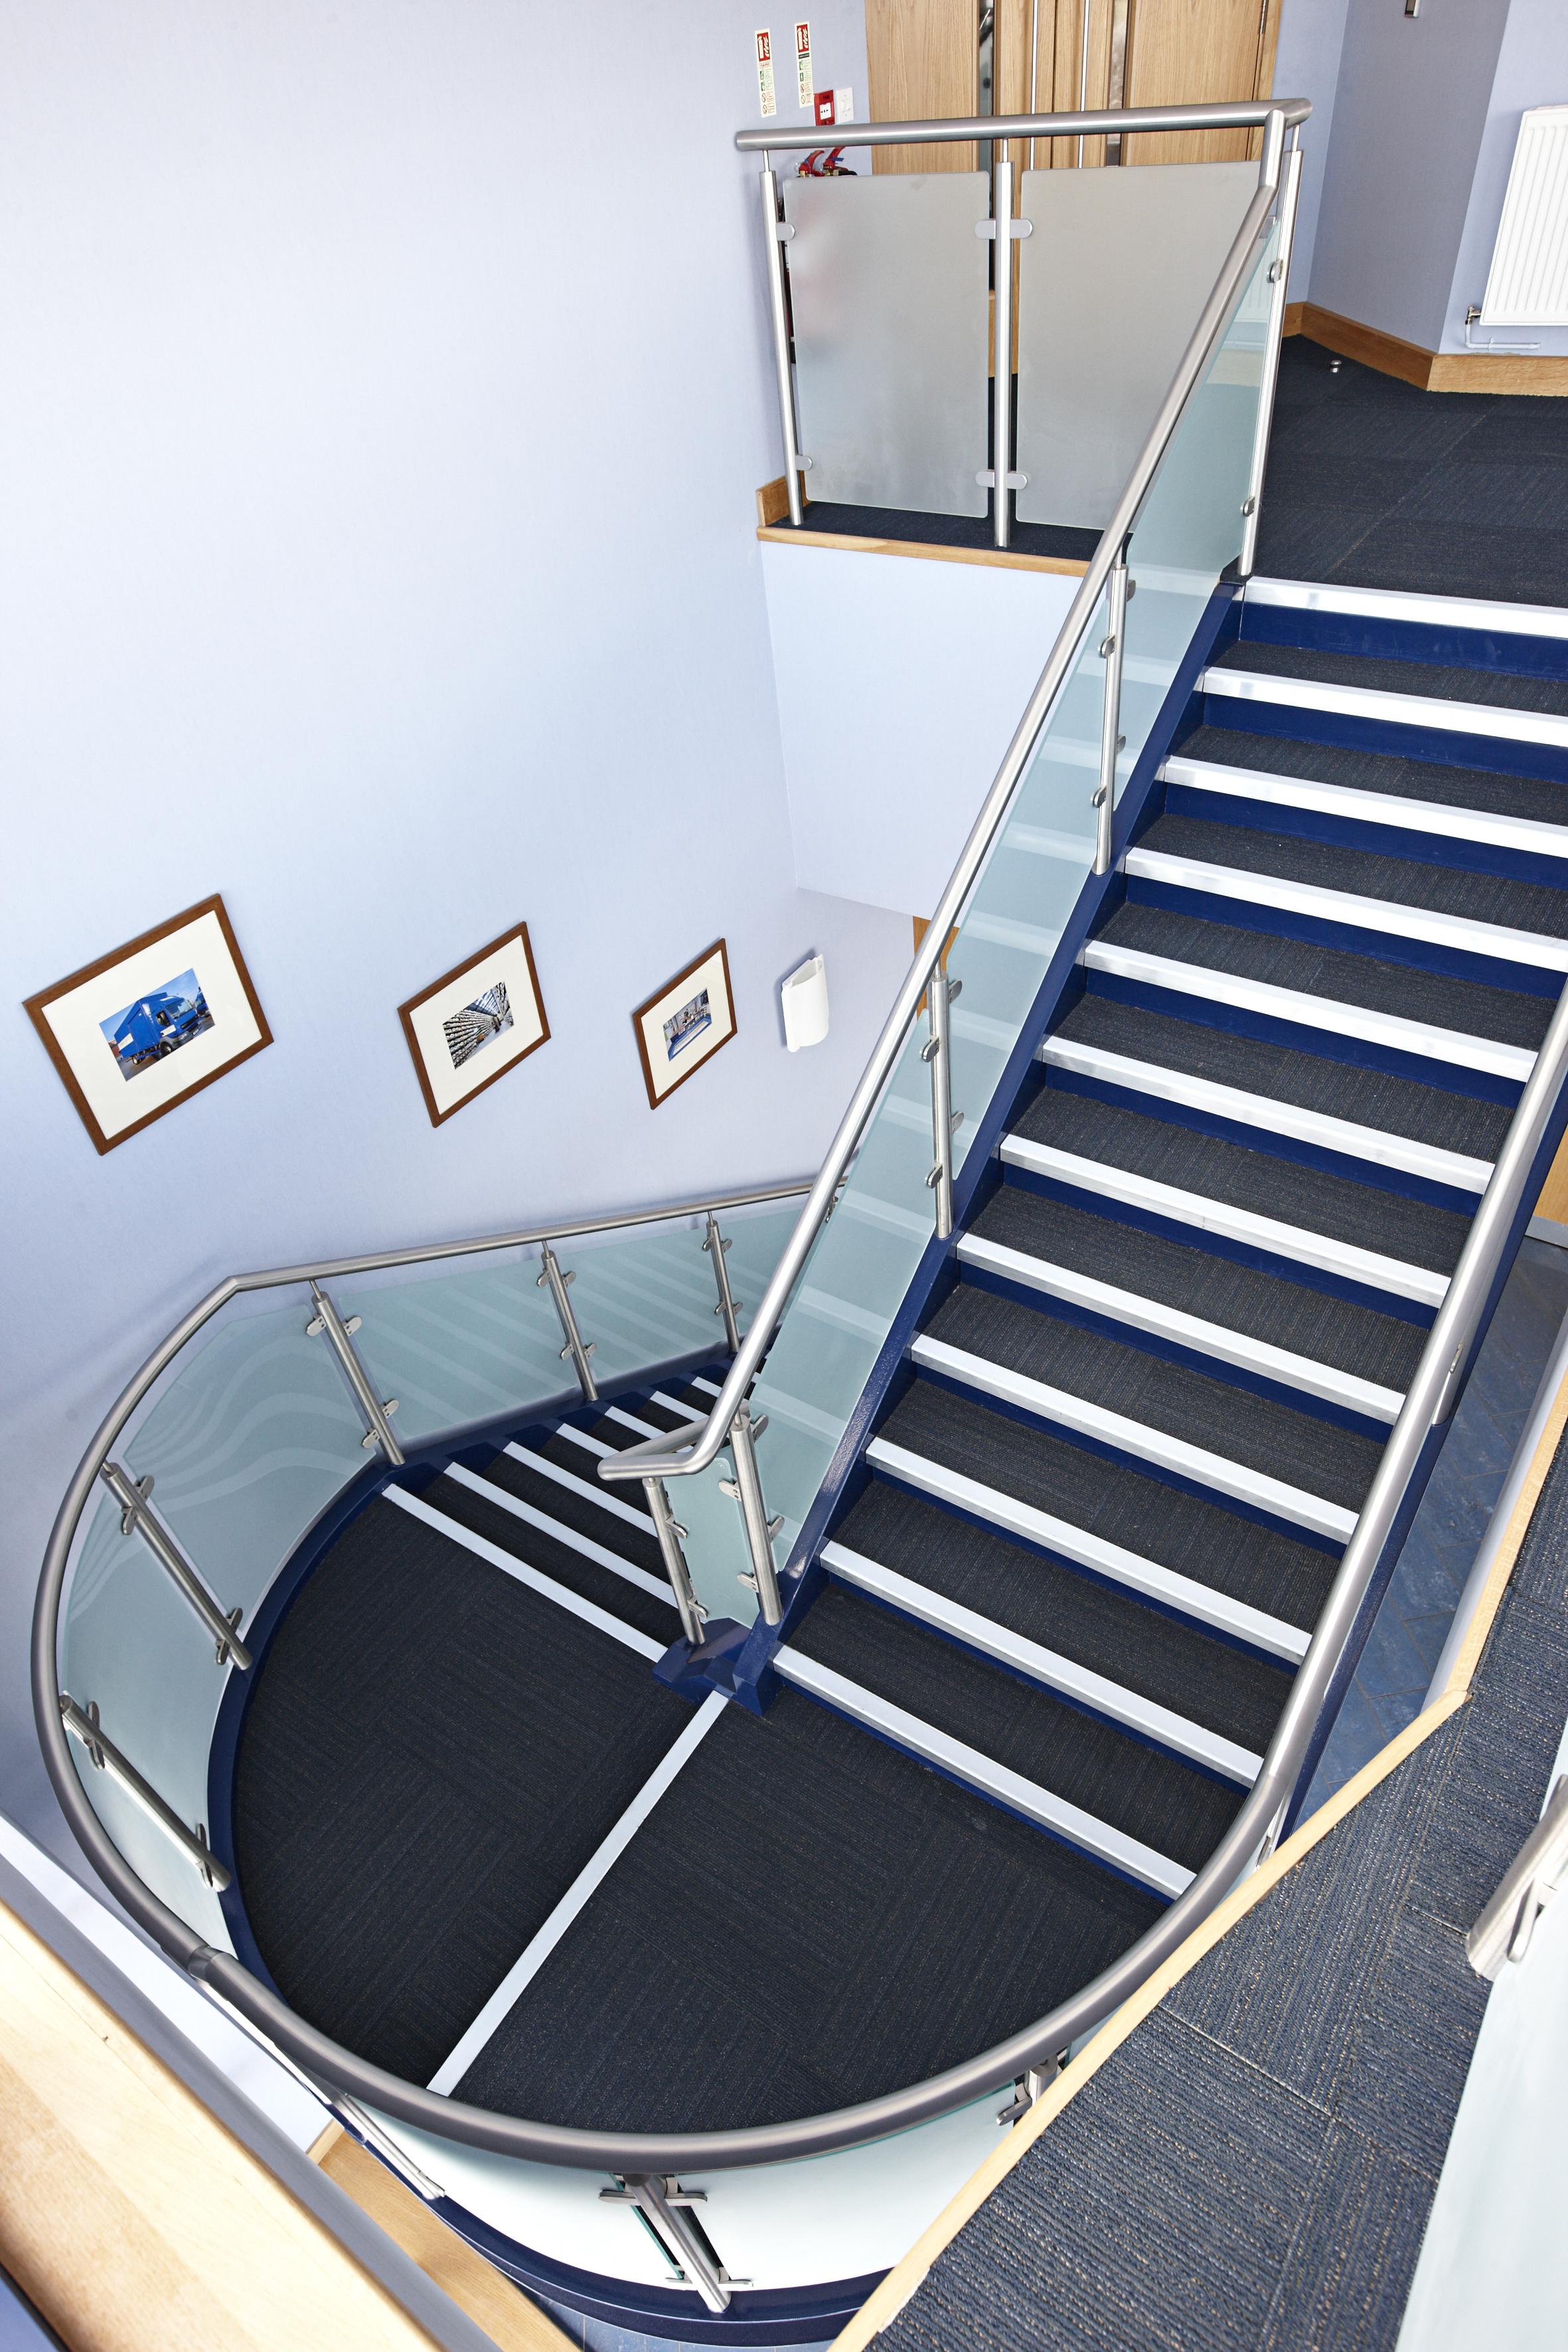 XT - The Ultimate Stair Edging